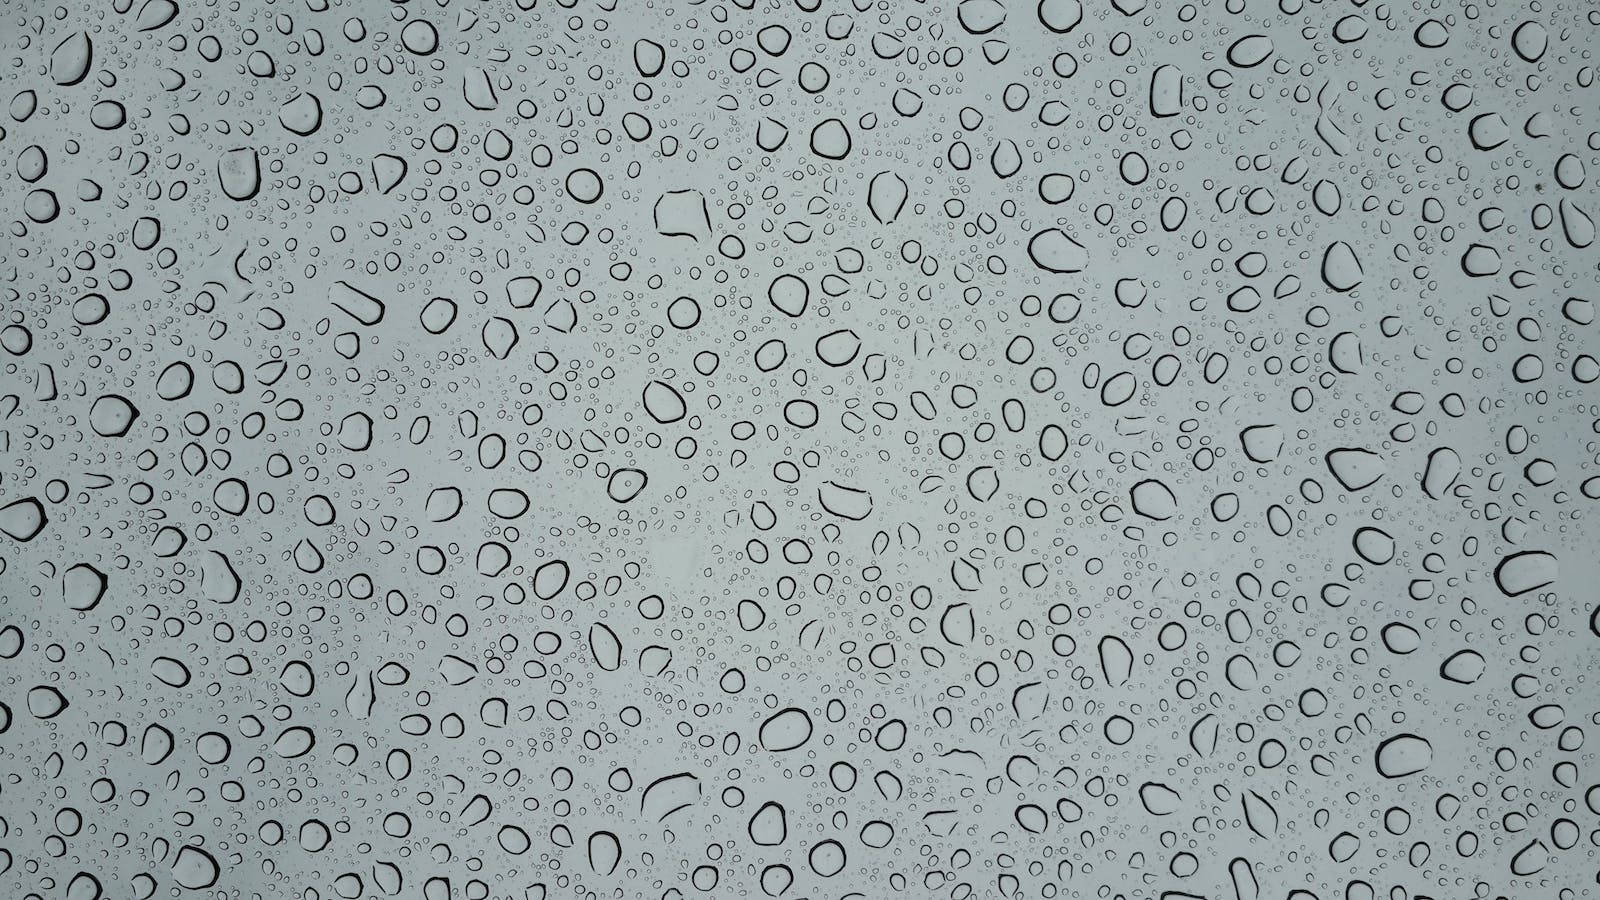 Water Droplets On Glass Wallpaper